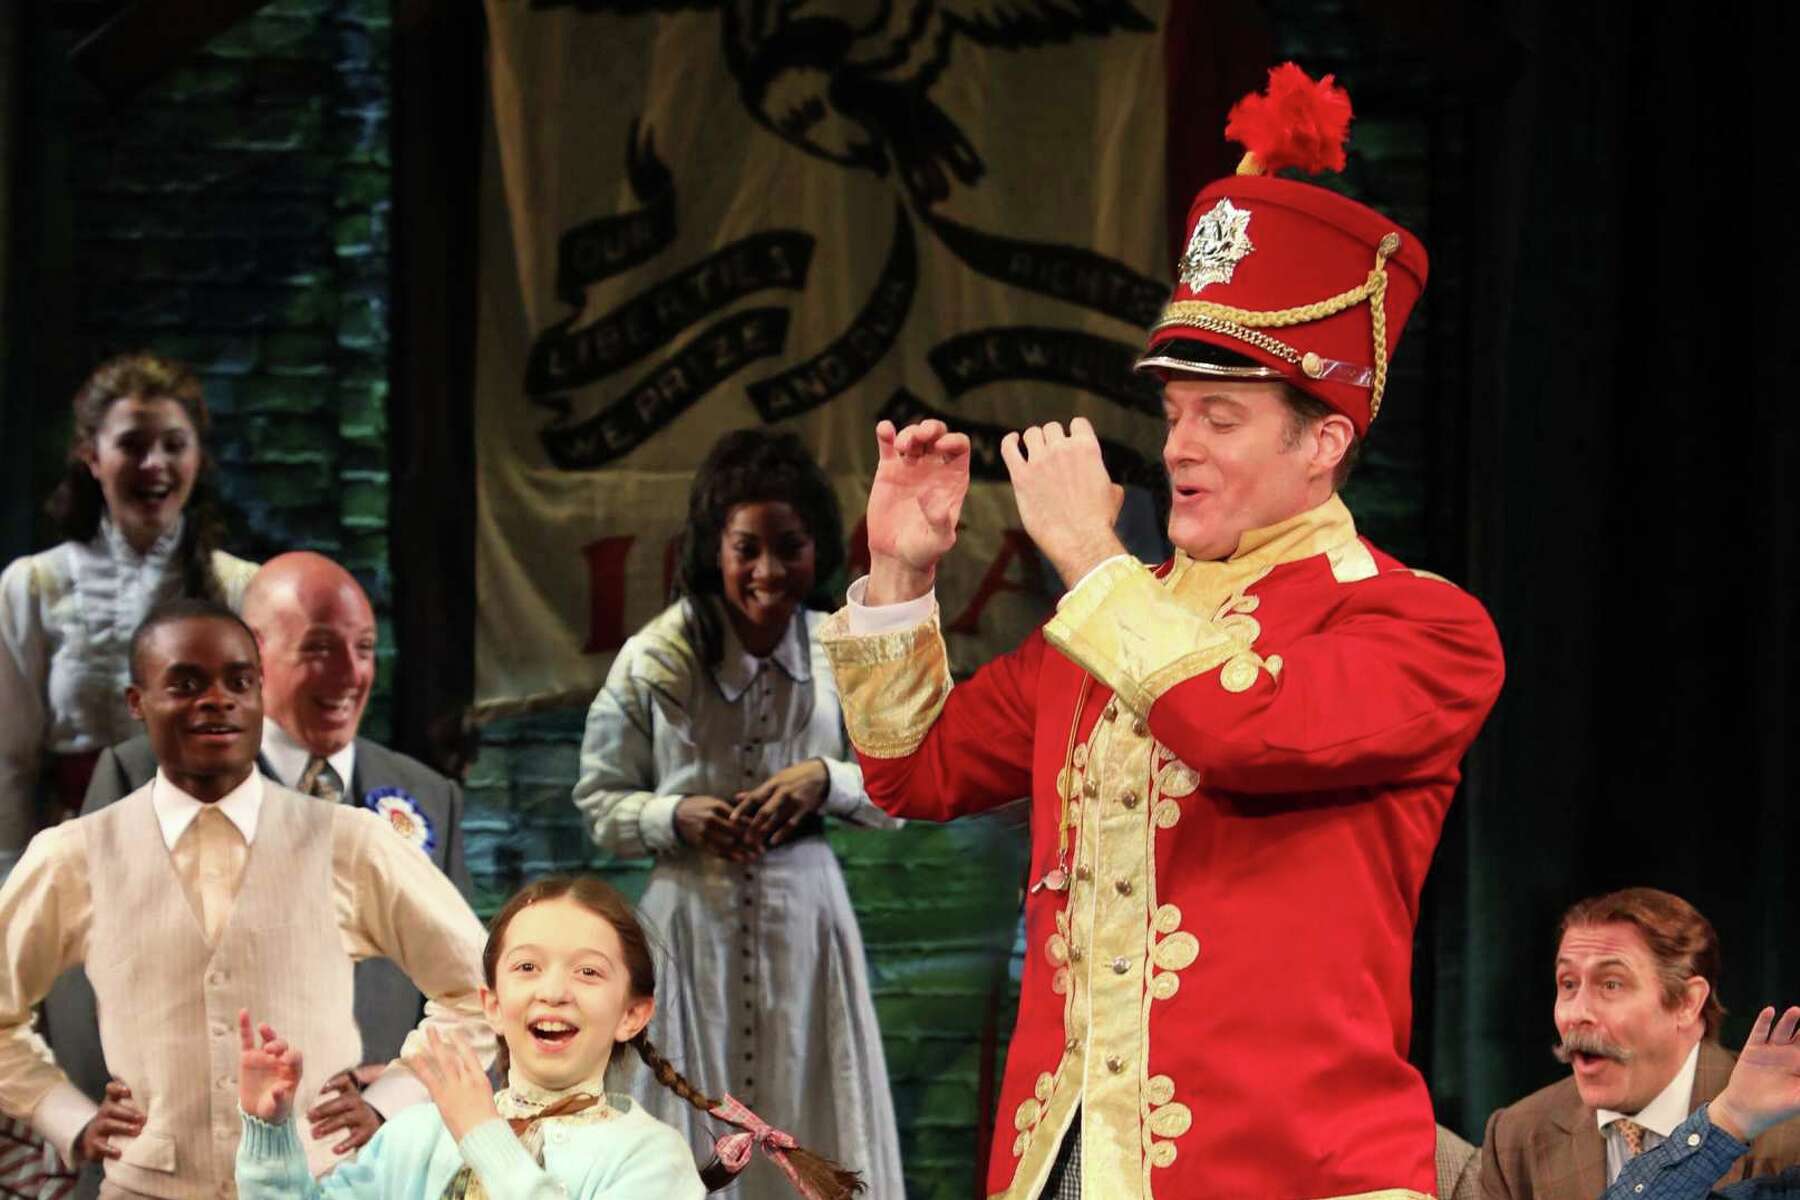 Who was the lead man in The Music Man?